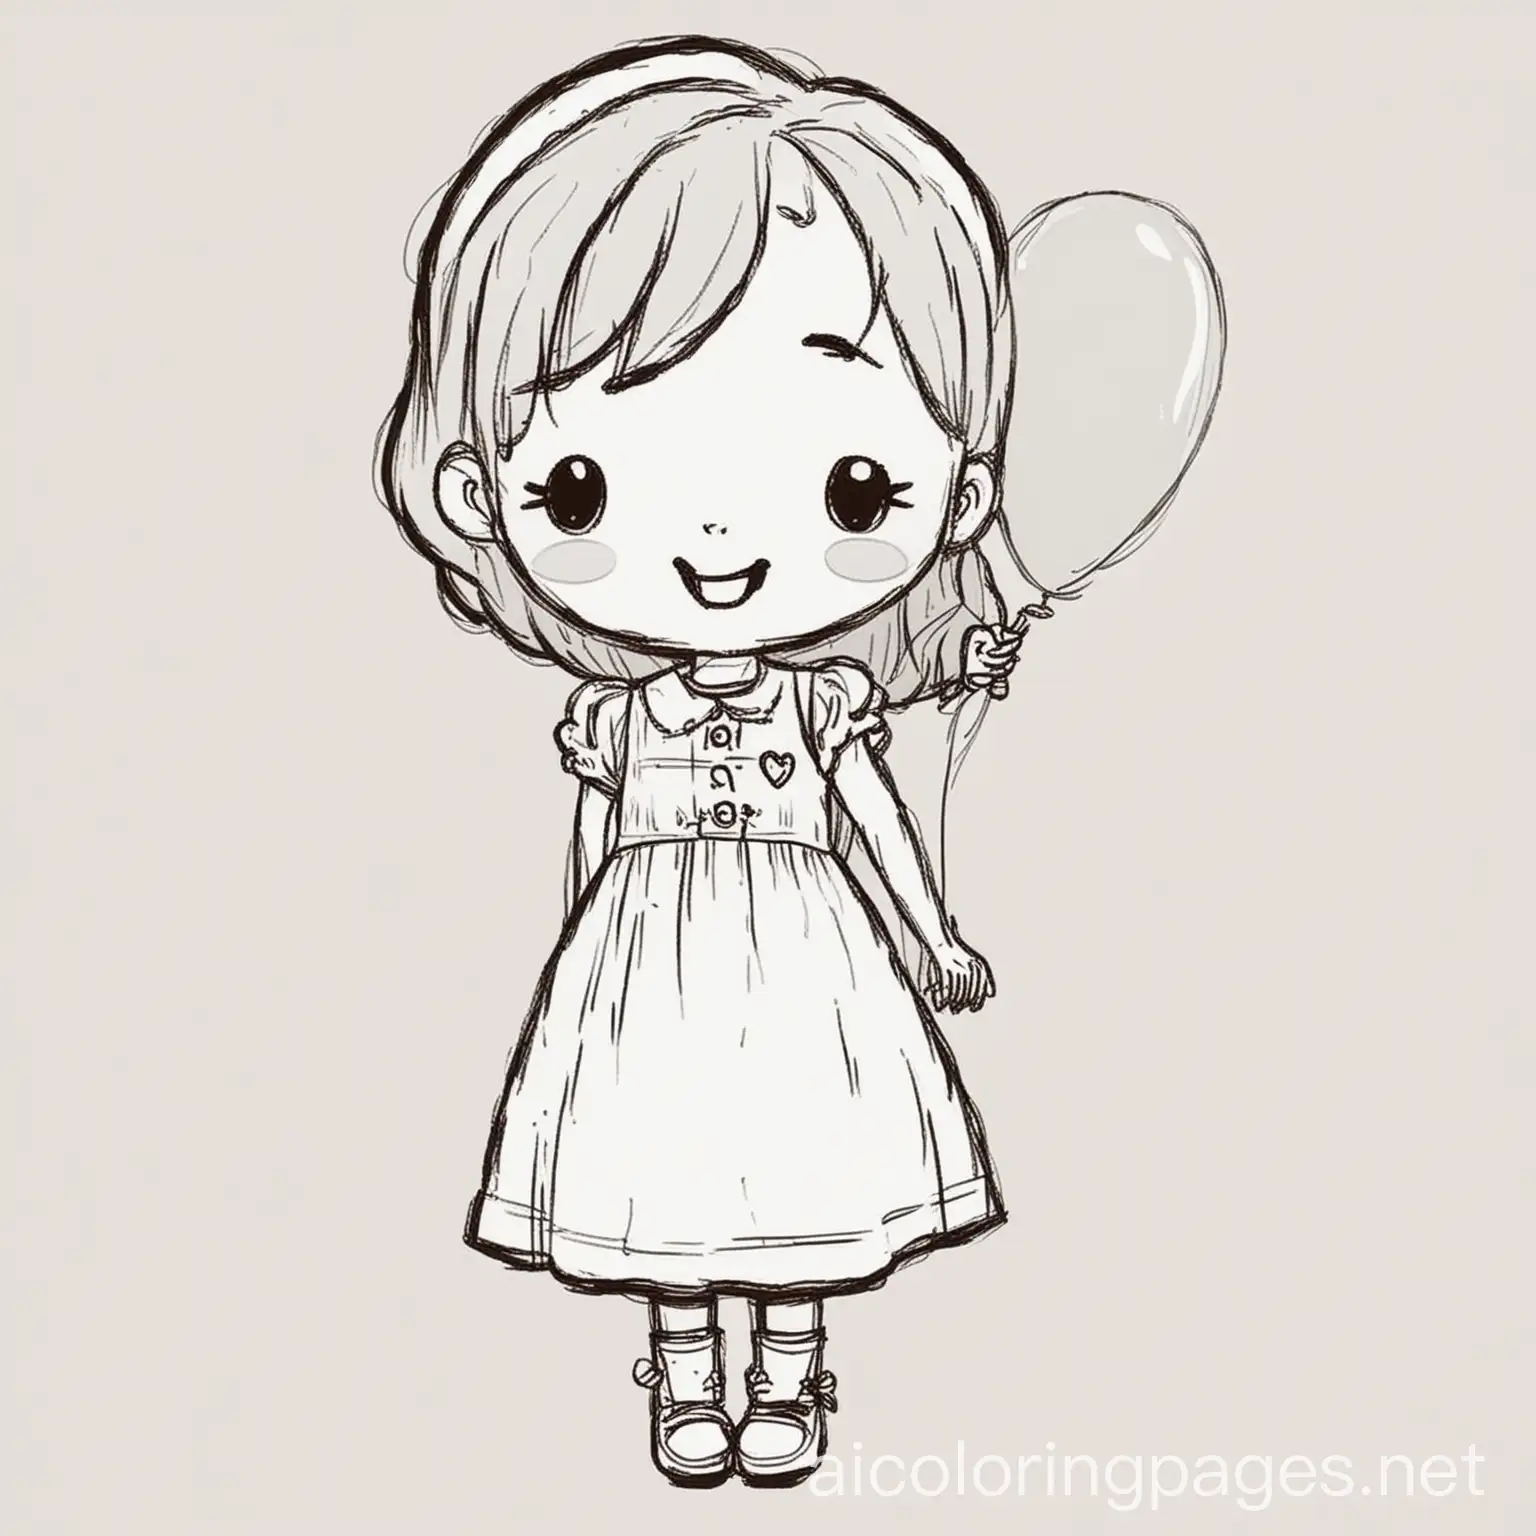 Kawaii Girl with a Balloon: A cute girl holding a heart-shaped balloon with a big smile and simple dress.
:thick line ,no shadow , white background, no color , Coloring Page, black and white, line art, white background, Simplicity, Ample White Space. The background of the coloring page is plain white to make it easy for young children to color within the lines. The outlines of all the subjects are easy to distinguish, making it simple for kids to color without too much difficulty